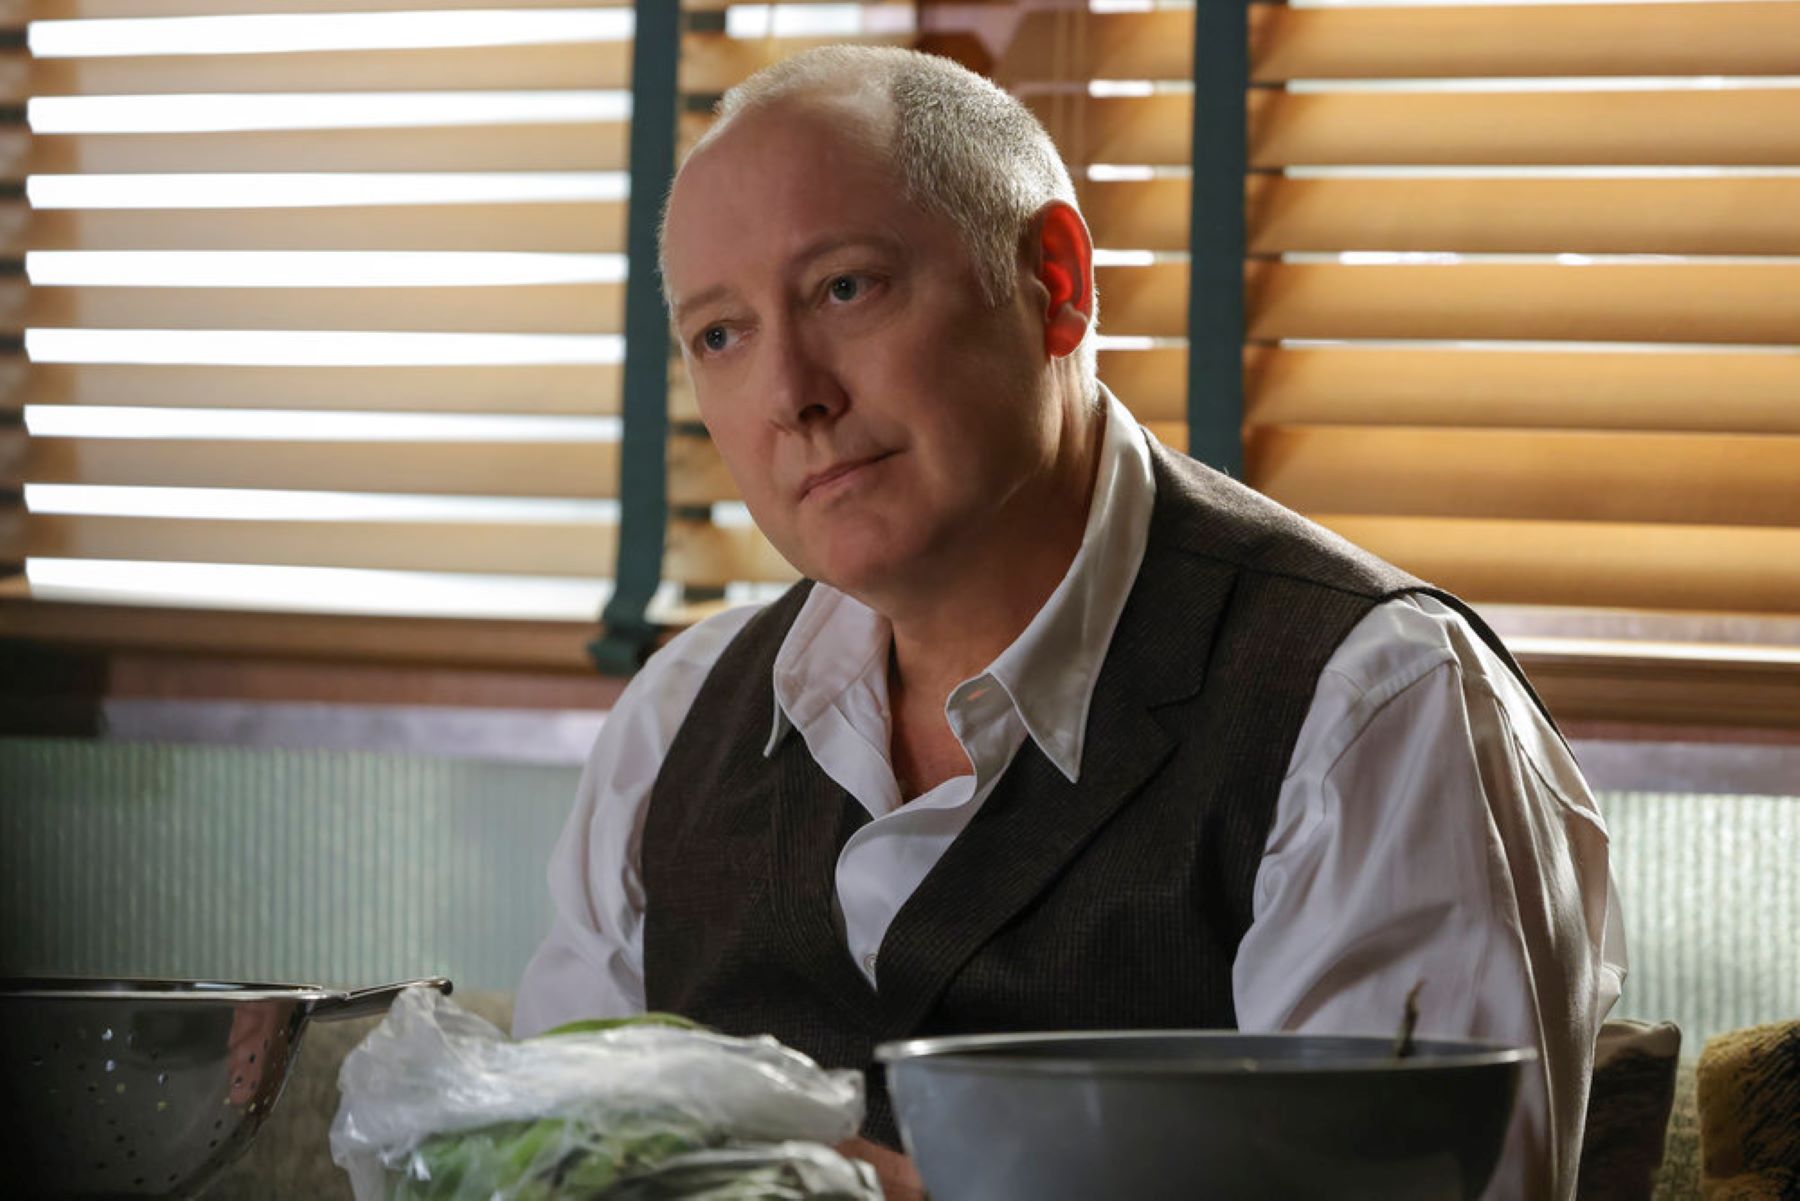 'The Blacklist' Season 9 Episode 8, which airs tonight, Jan. 13, stars James Spader as Red. In the photo, Red is wearing a black vest over a long-sleeved button-up shirt.